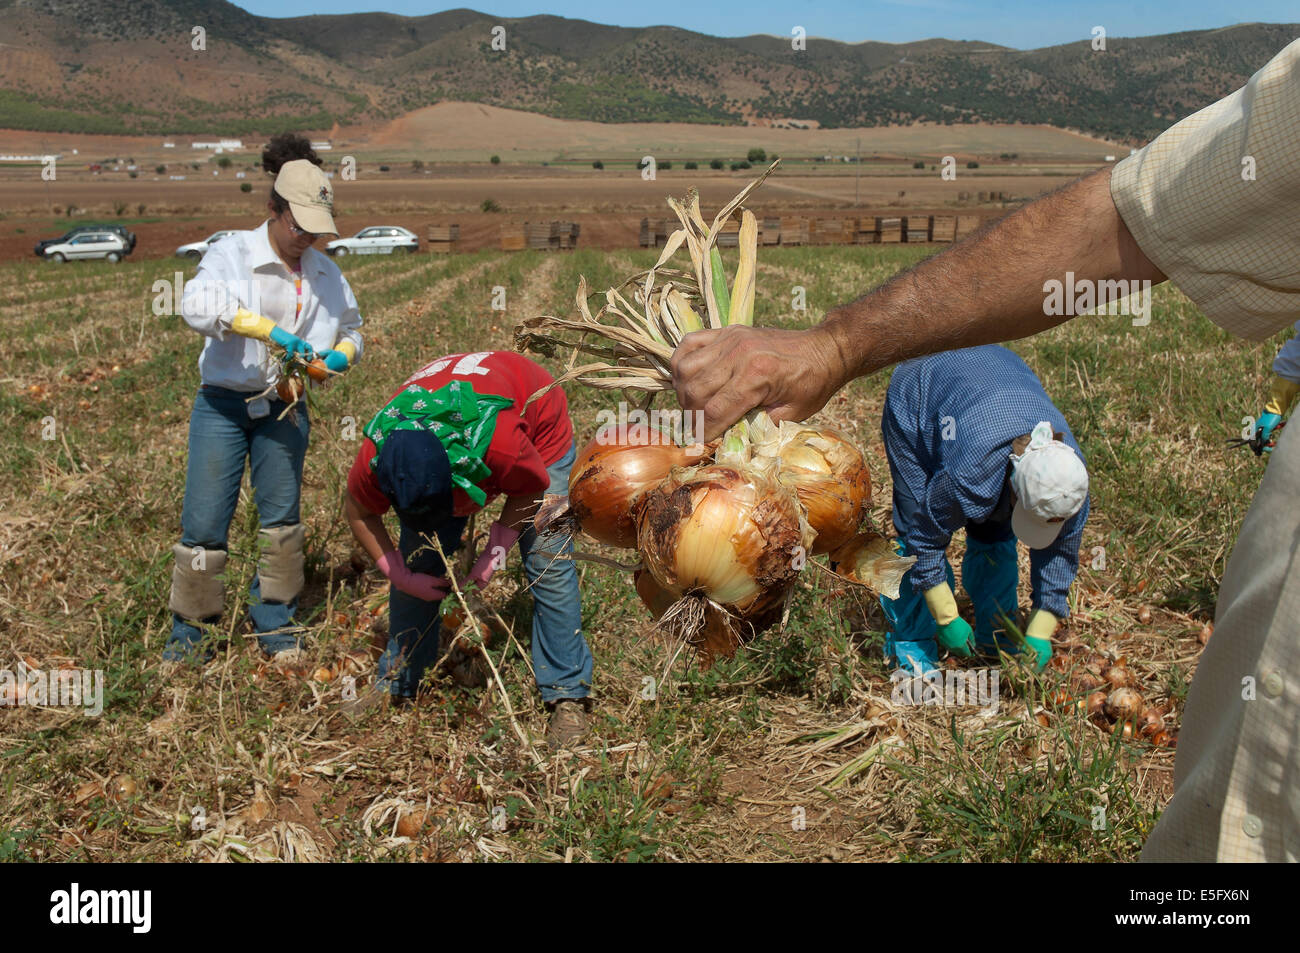 Ecological agriculture, Onions, Navahermosa-Sierra de Yeguas, Malaga-province, Region of Andalusia, Spain, Europe Stock Photo